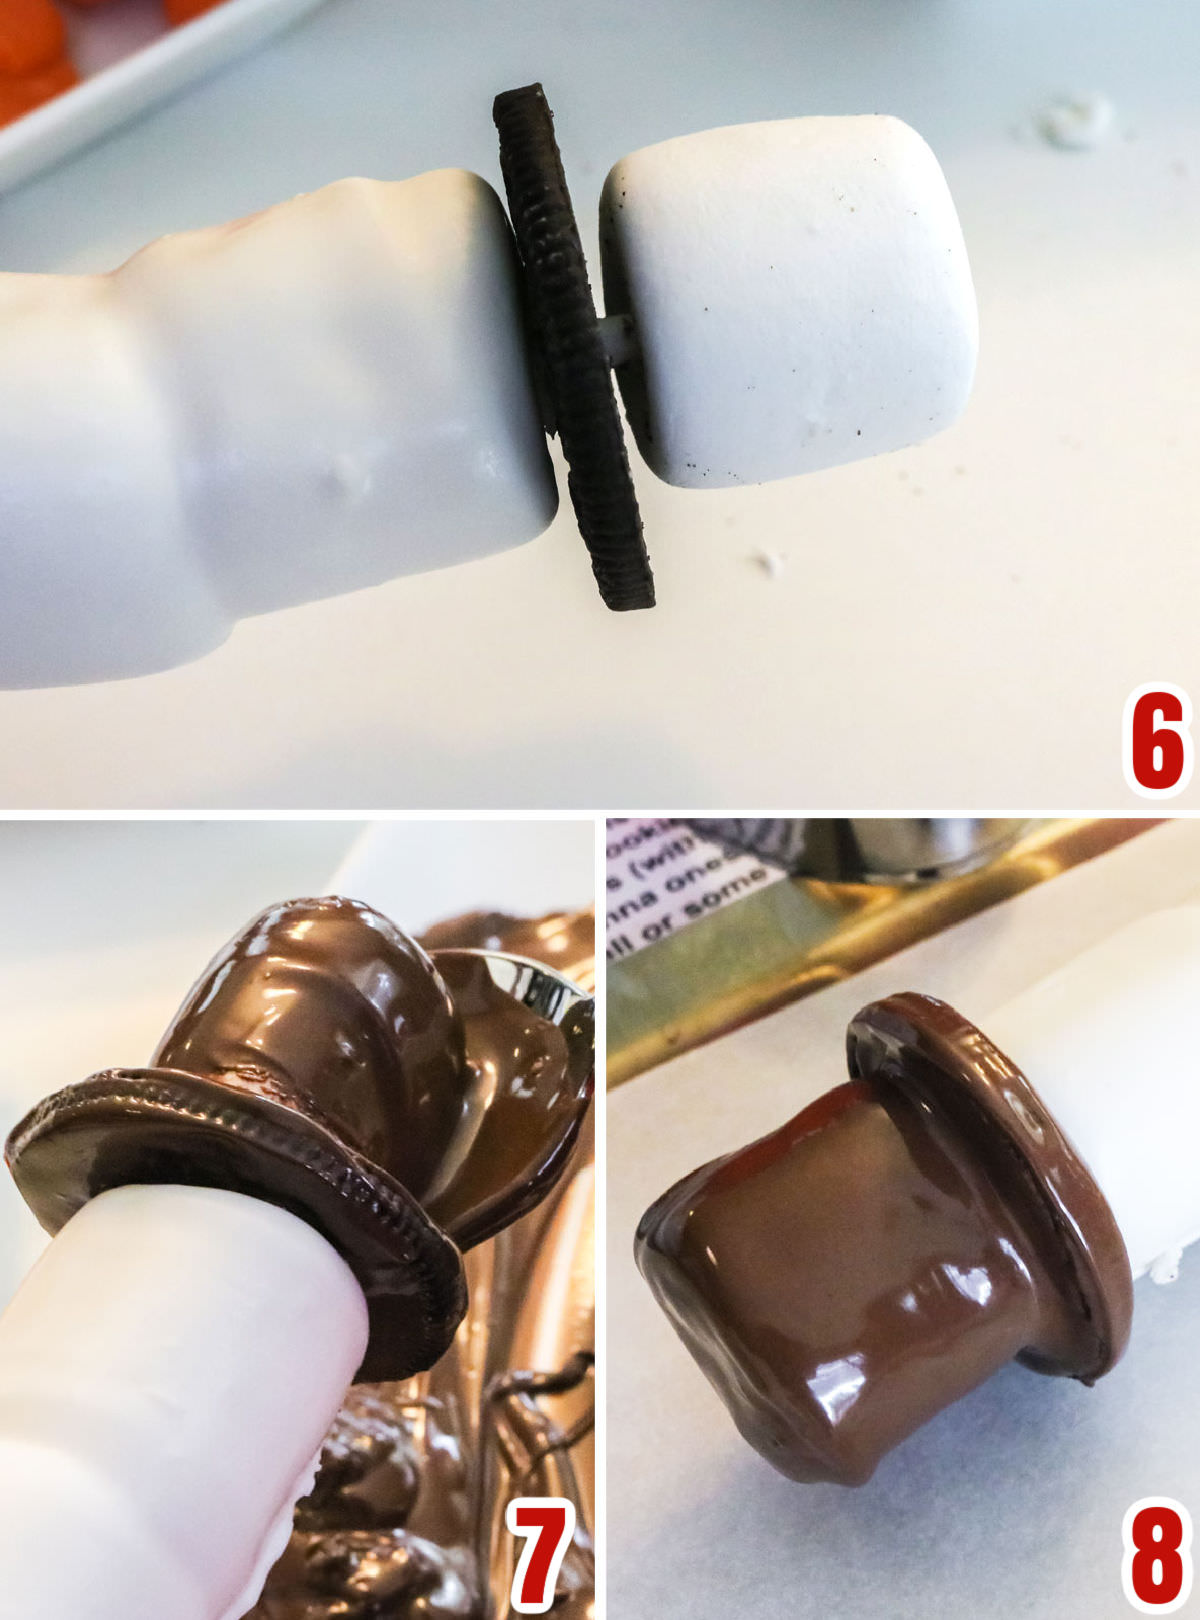 Collage image showing the steps for creating the chocolate Snowman hat.